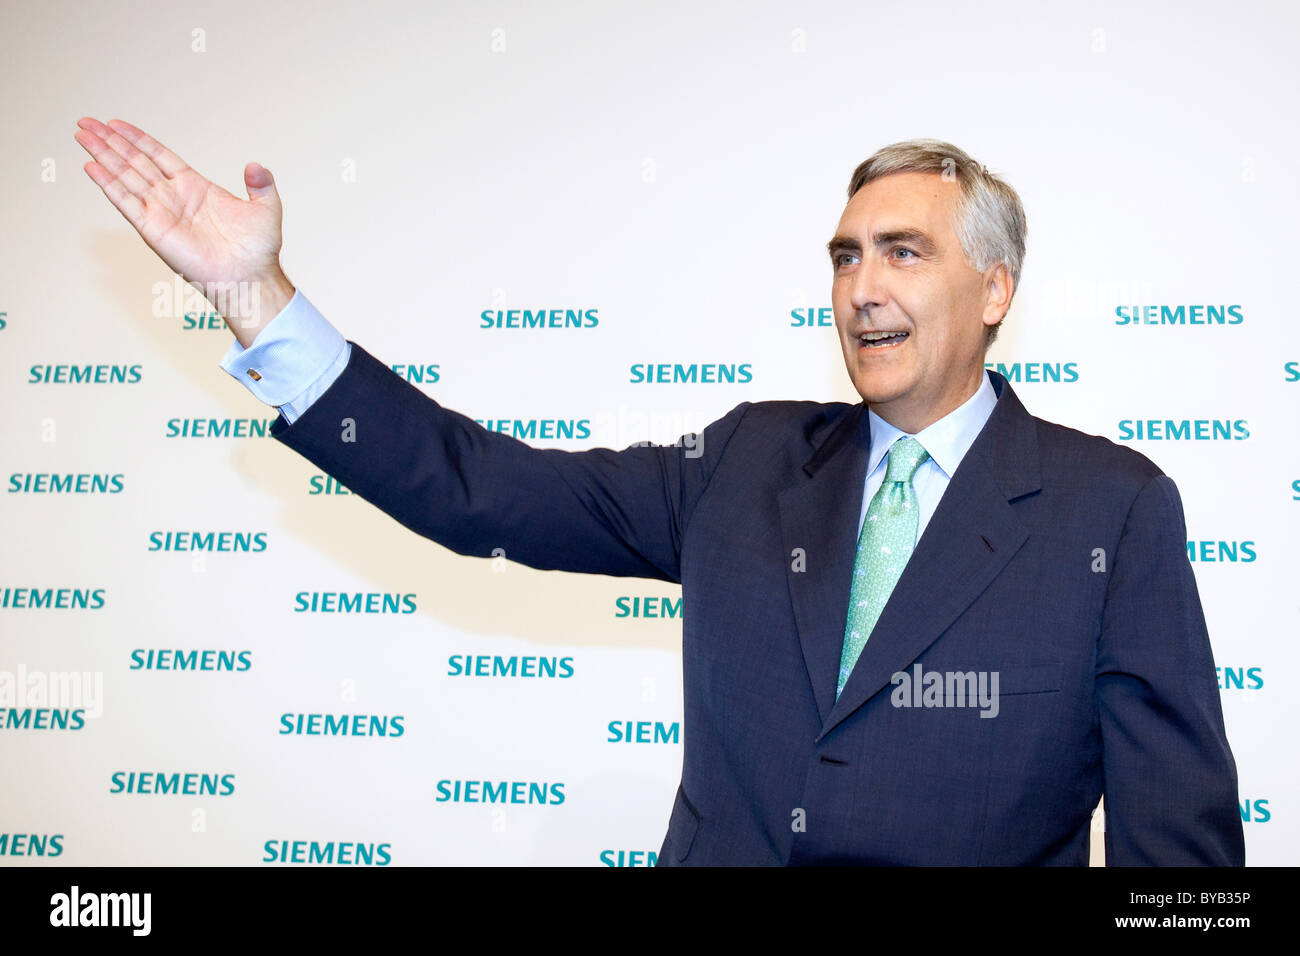 Peter Loescher, right, CEO of Siemens AG, during the press conference on financial statements on 11.11.2010 in Munich, Bavaria Stock Photo